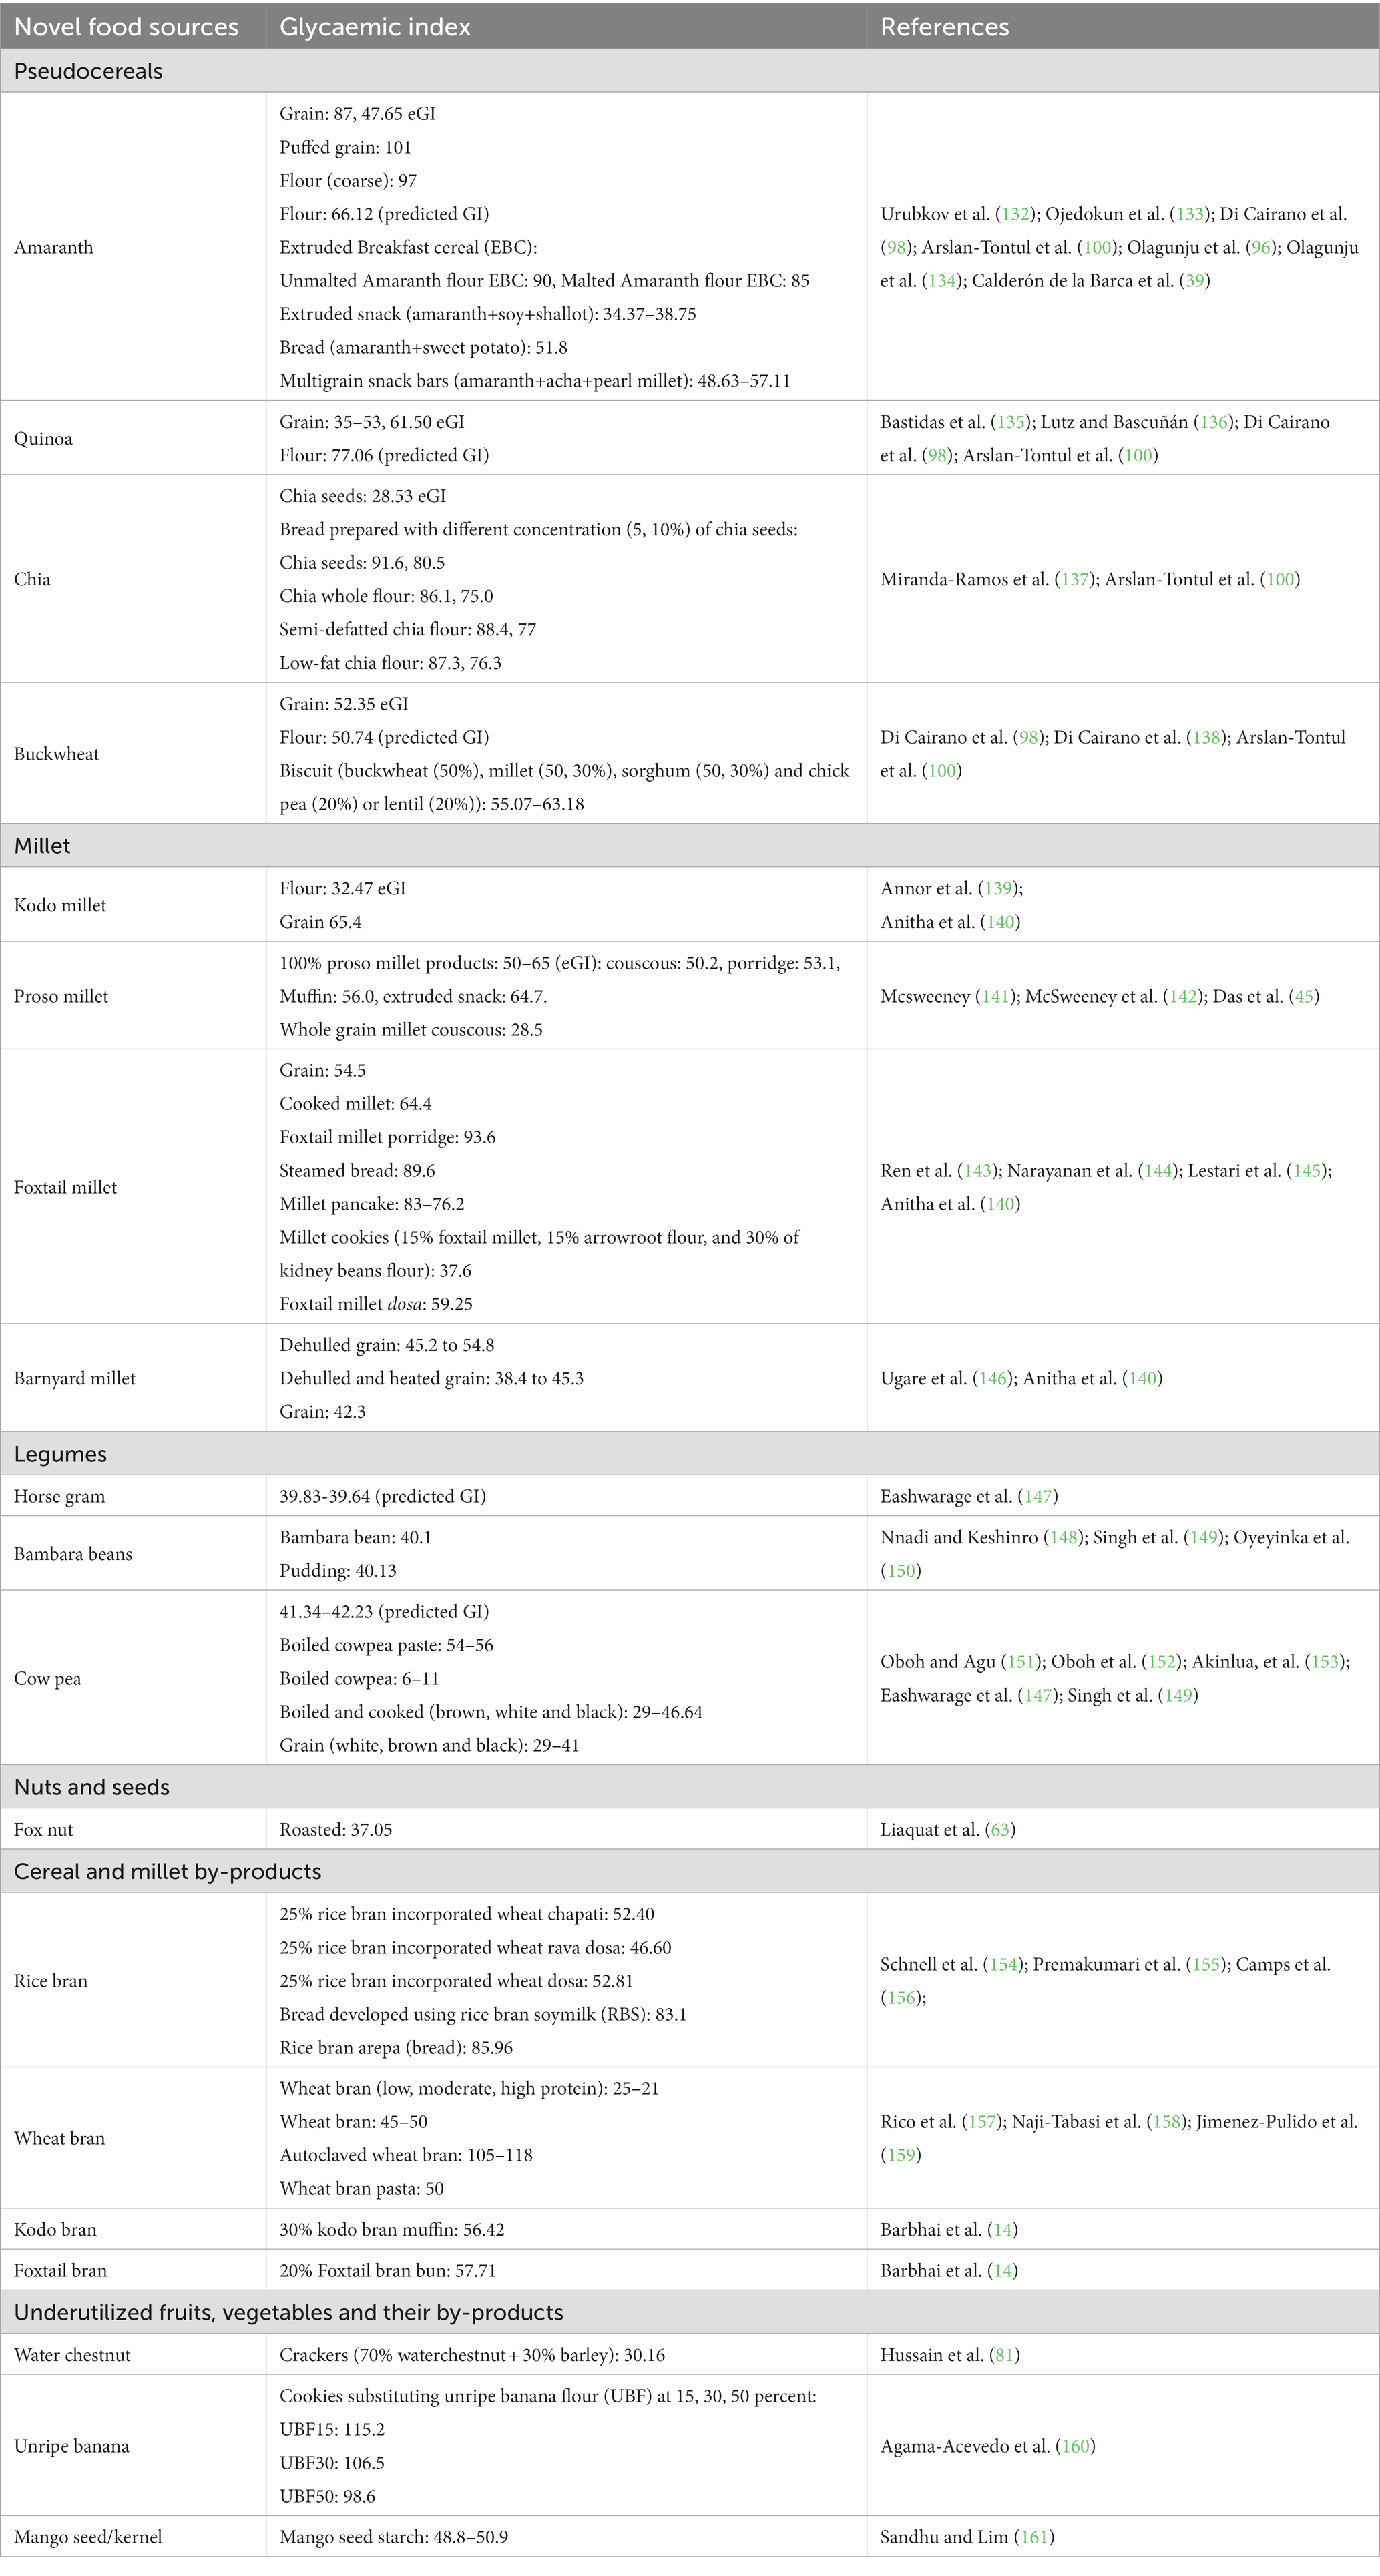 Frontiers  Exploring the underutilized novel foods and starches for  formulation of low glycemic therapeutic foods: a review